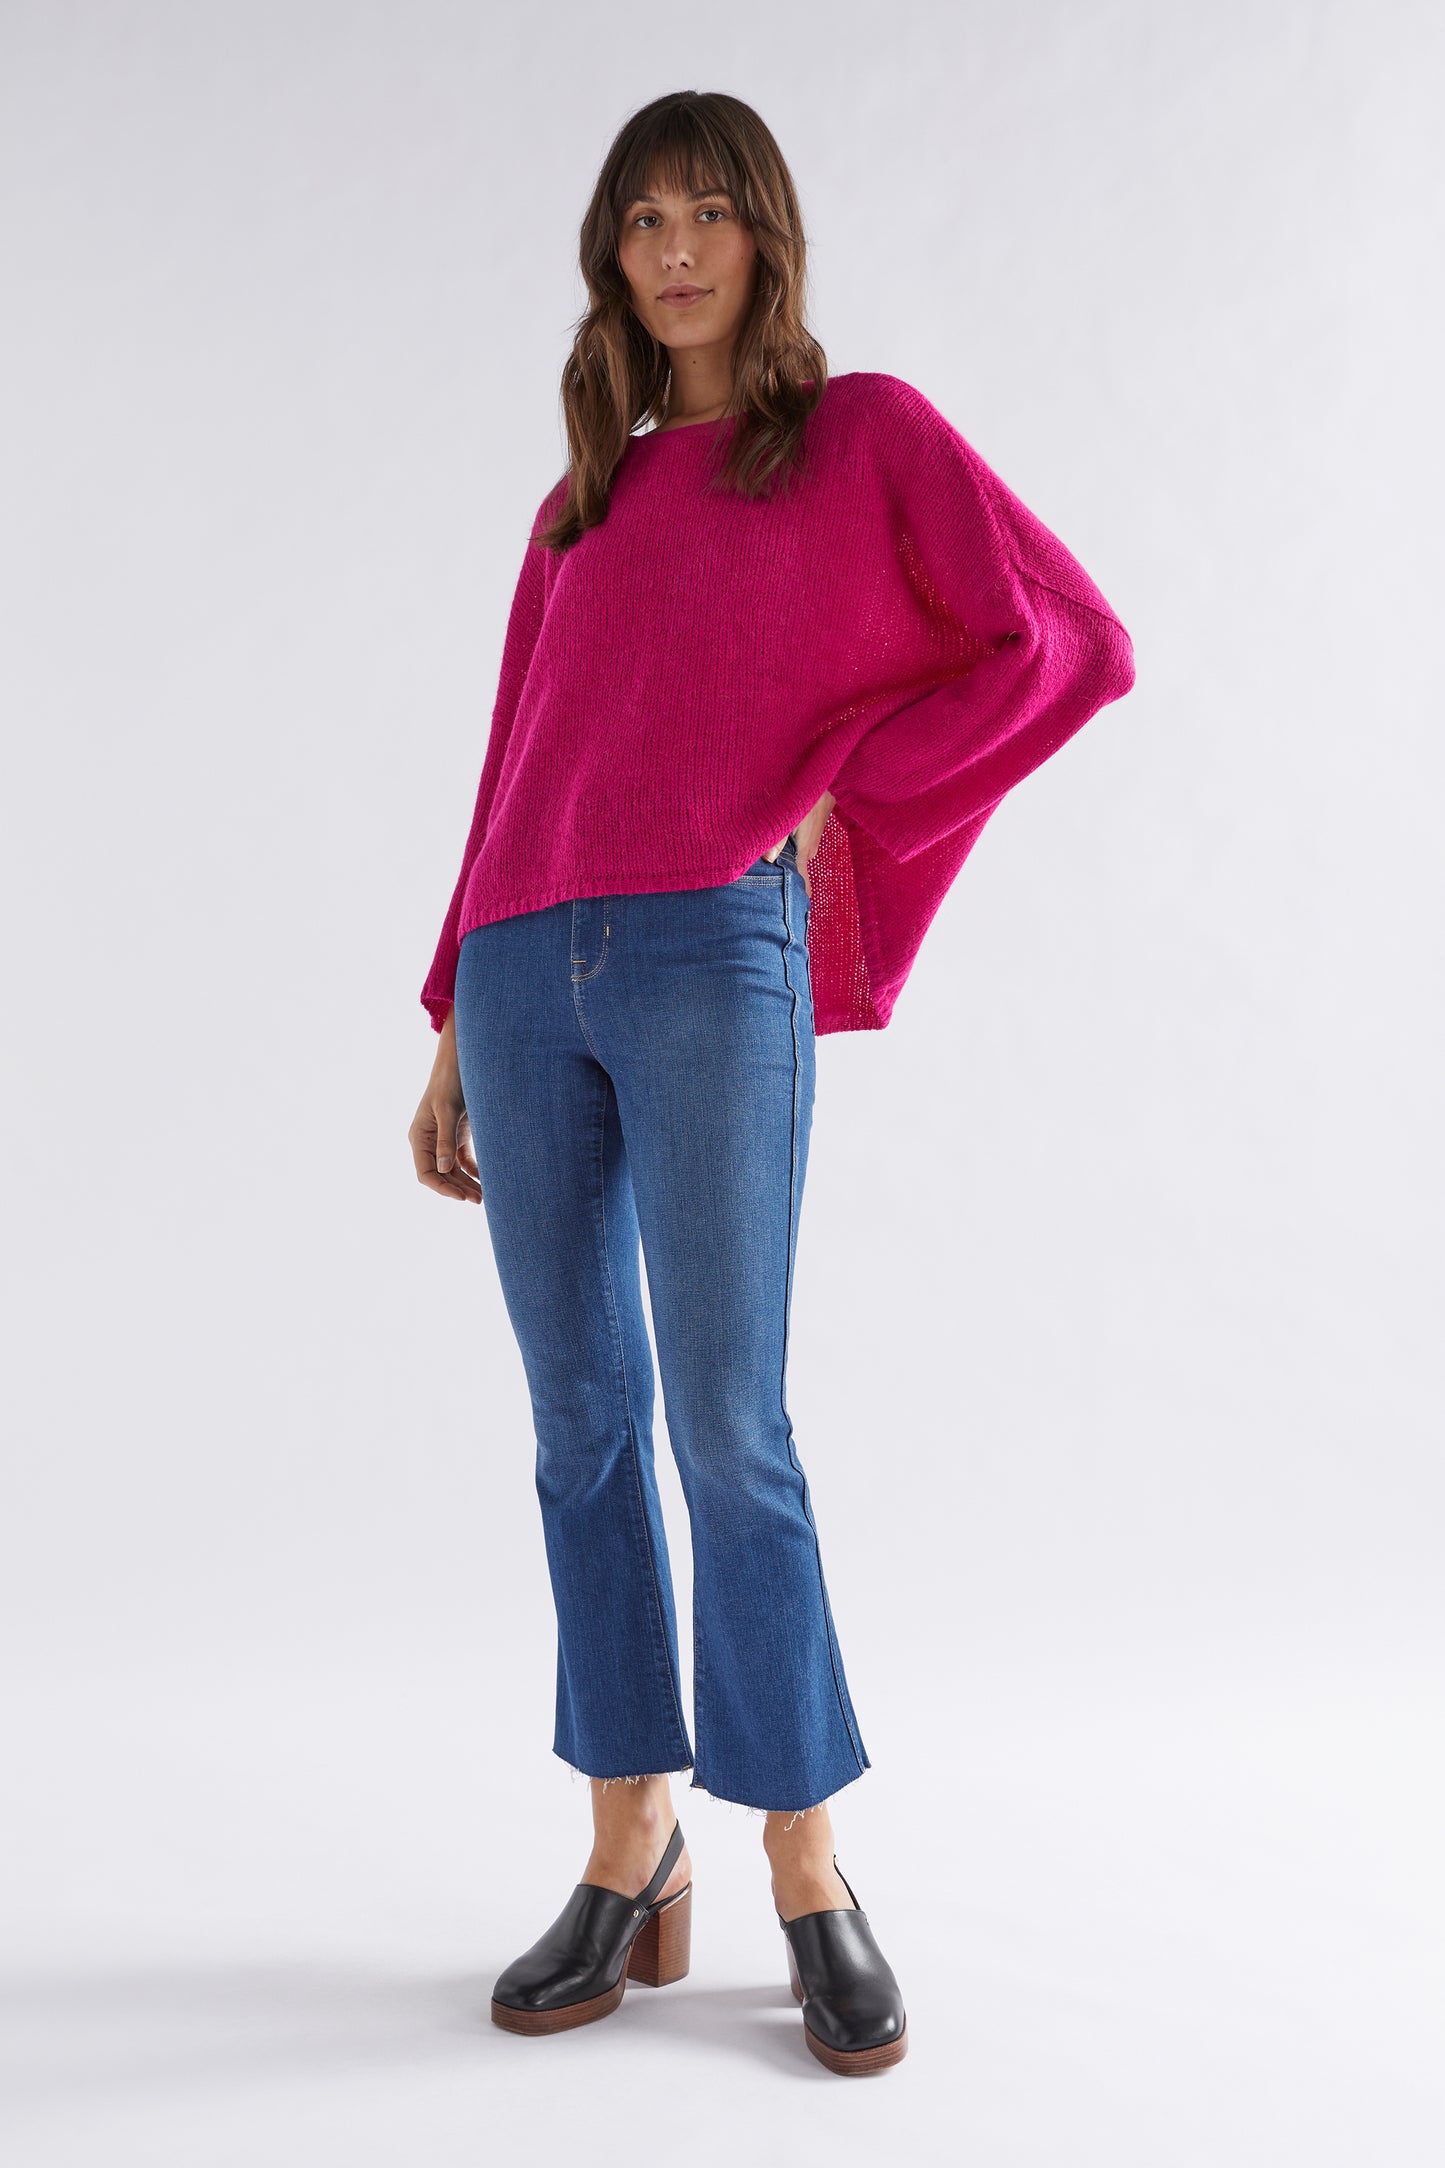 Anga Relaxed Box Fit Alpaca Yarn Knit Sweater Model Front Full Body | BRIGHT PINK